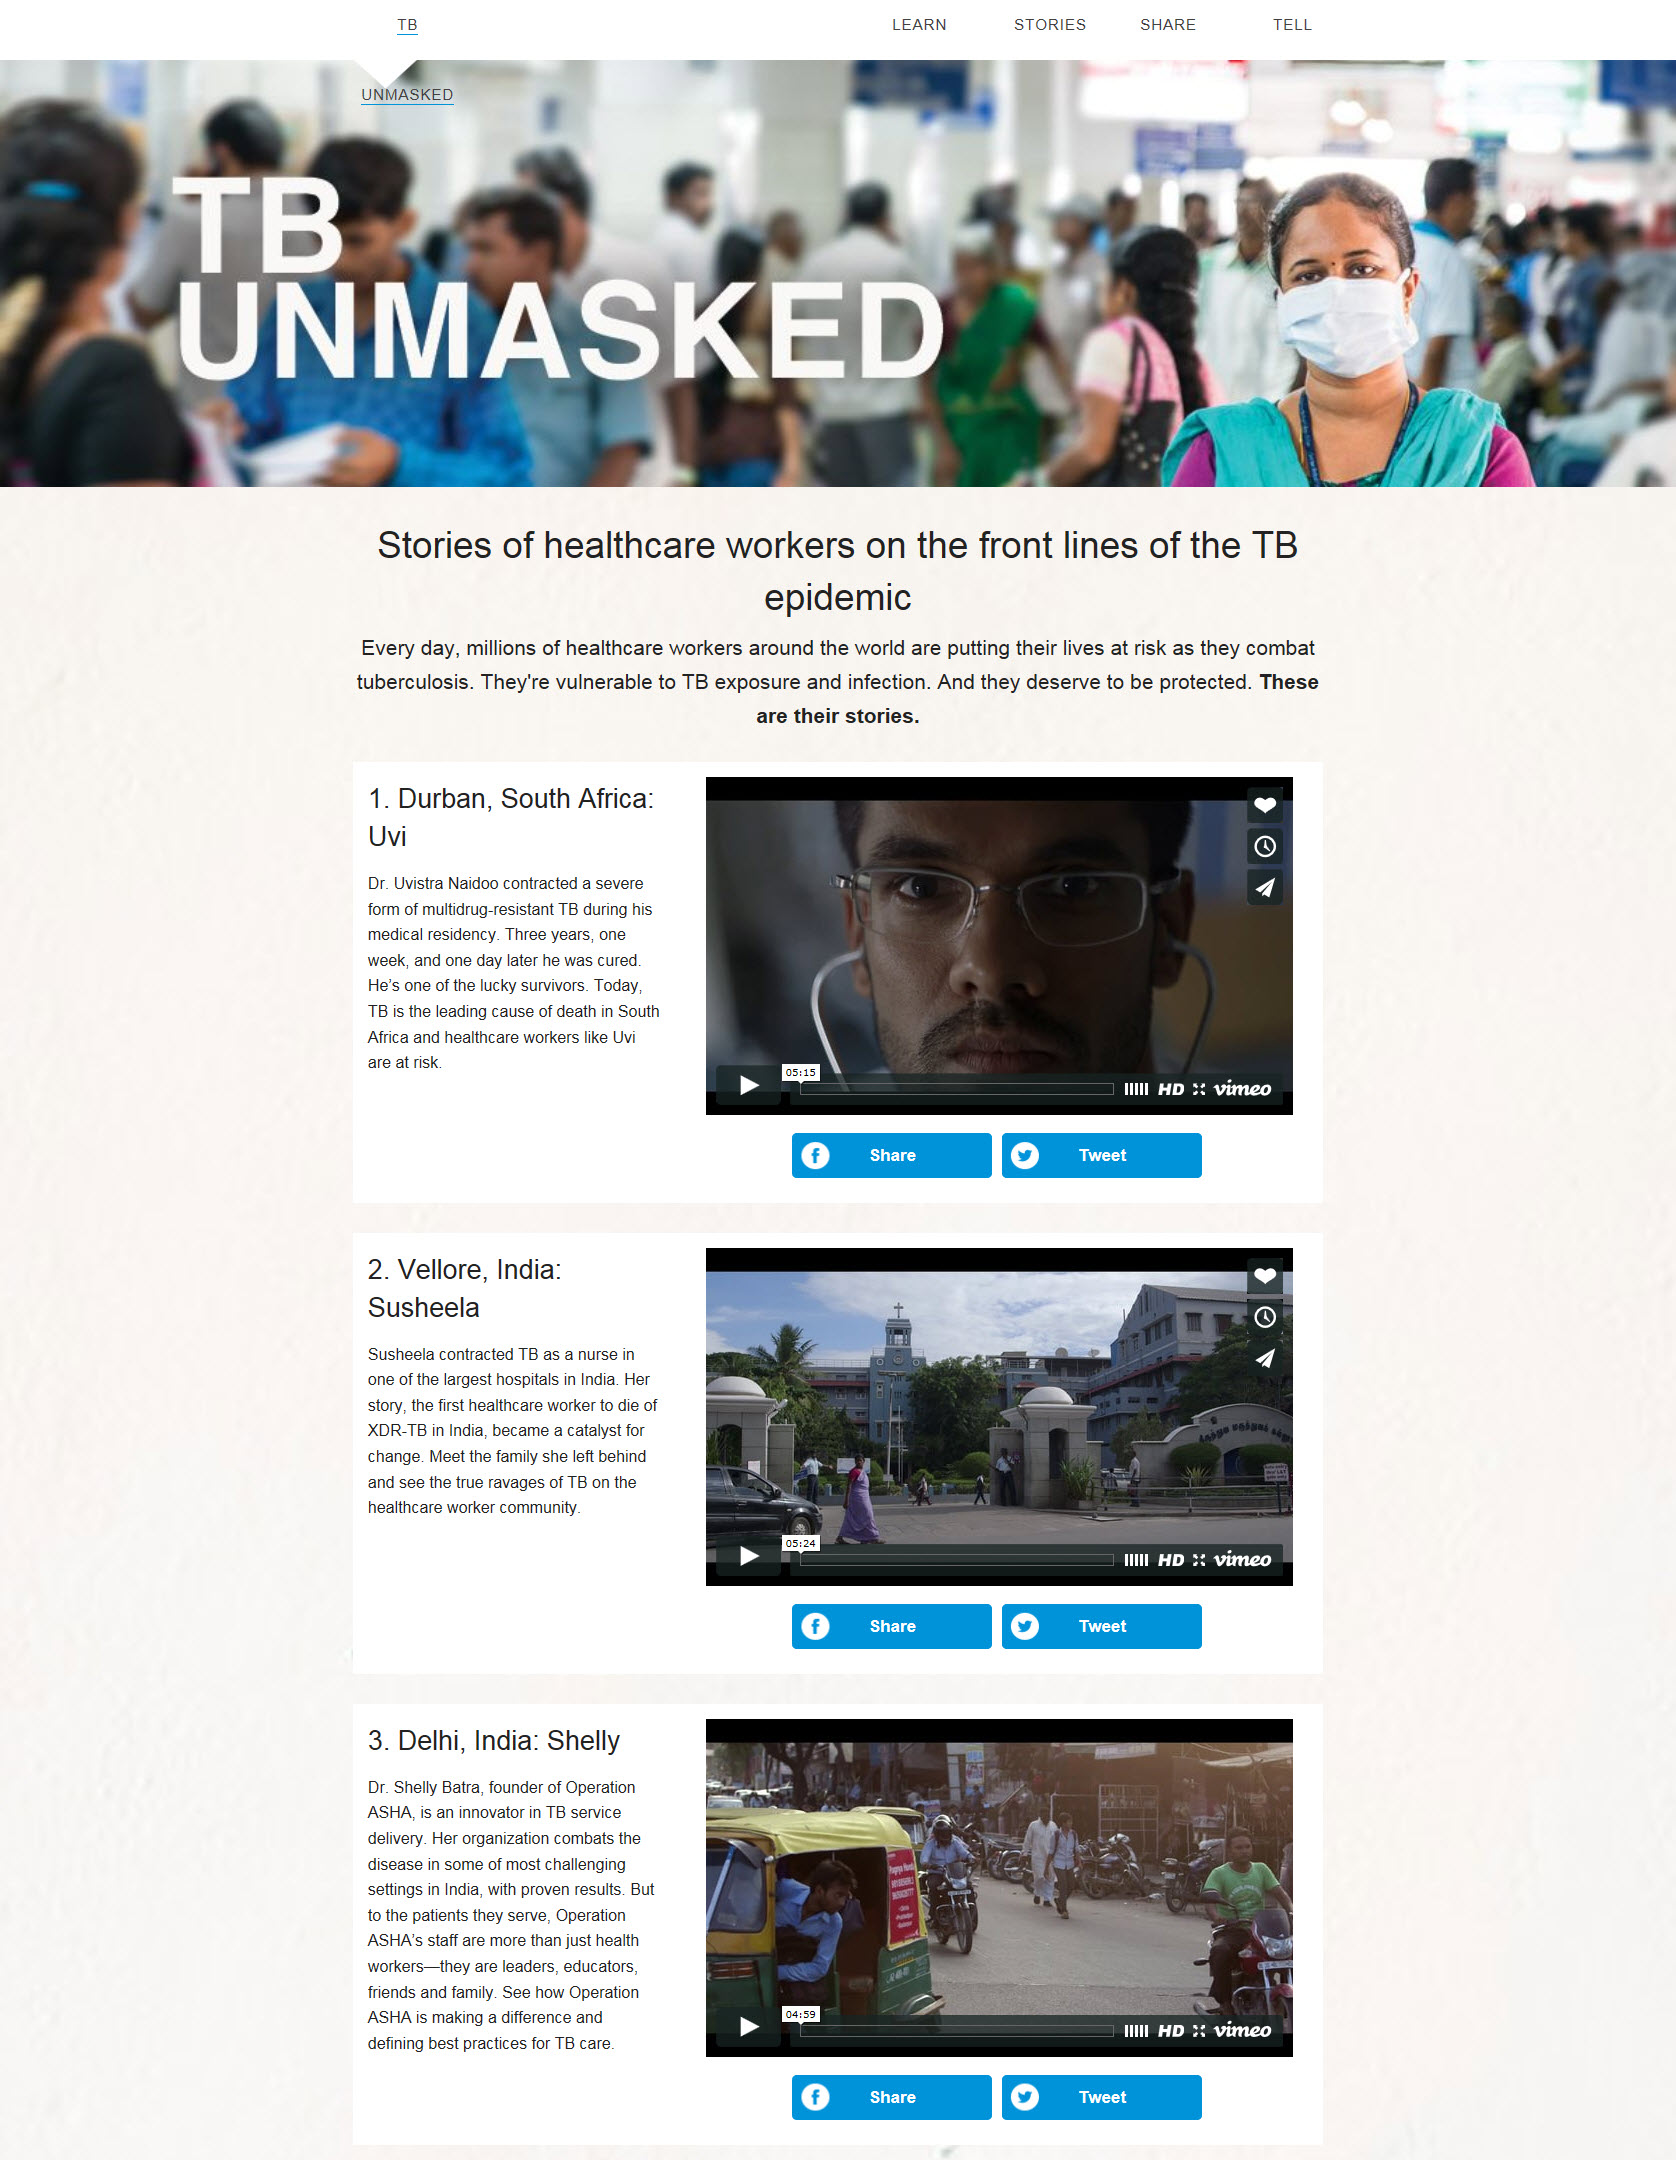 TB Unmasked: Stories of Healthcare Workers on the Front Lines of the TB Epidemic